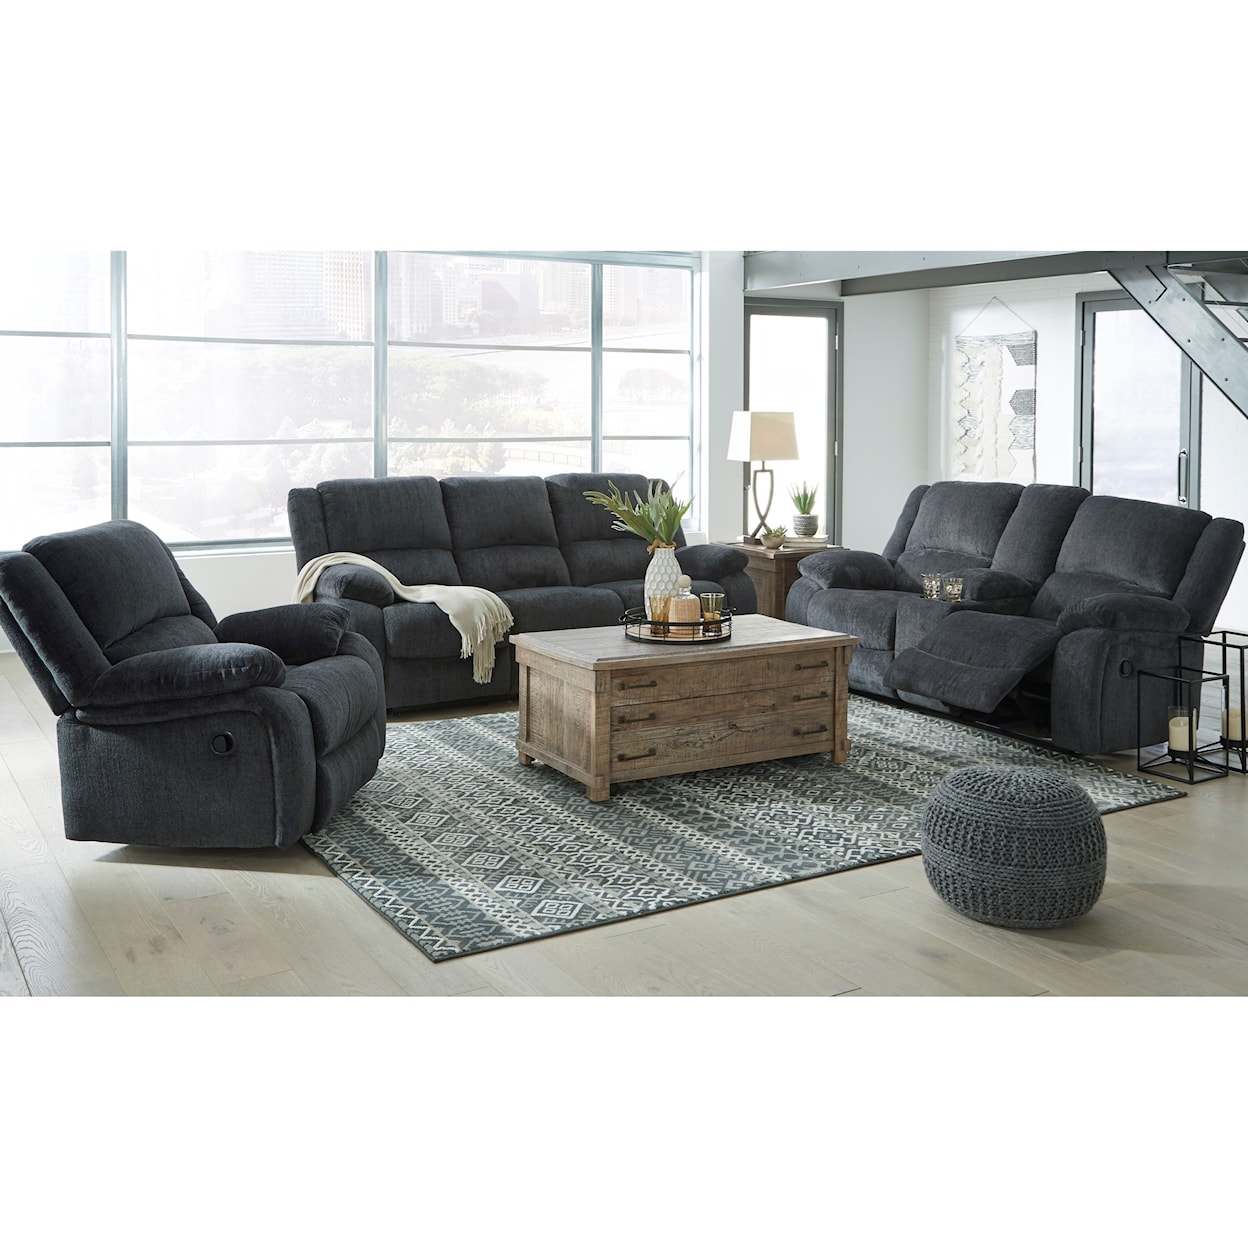 Signature Design by Ashley Draycoll Reclining Living Room Group